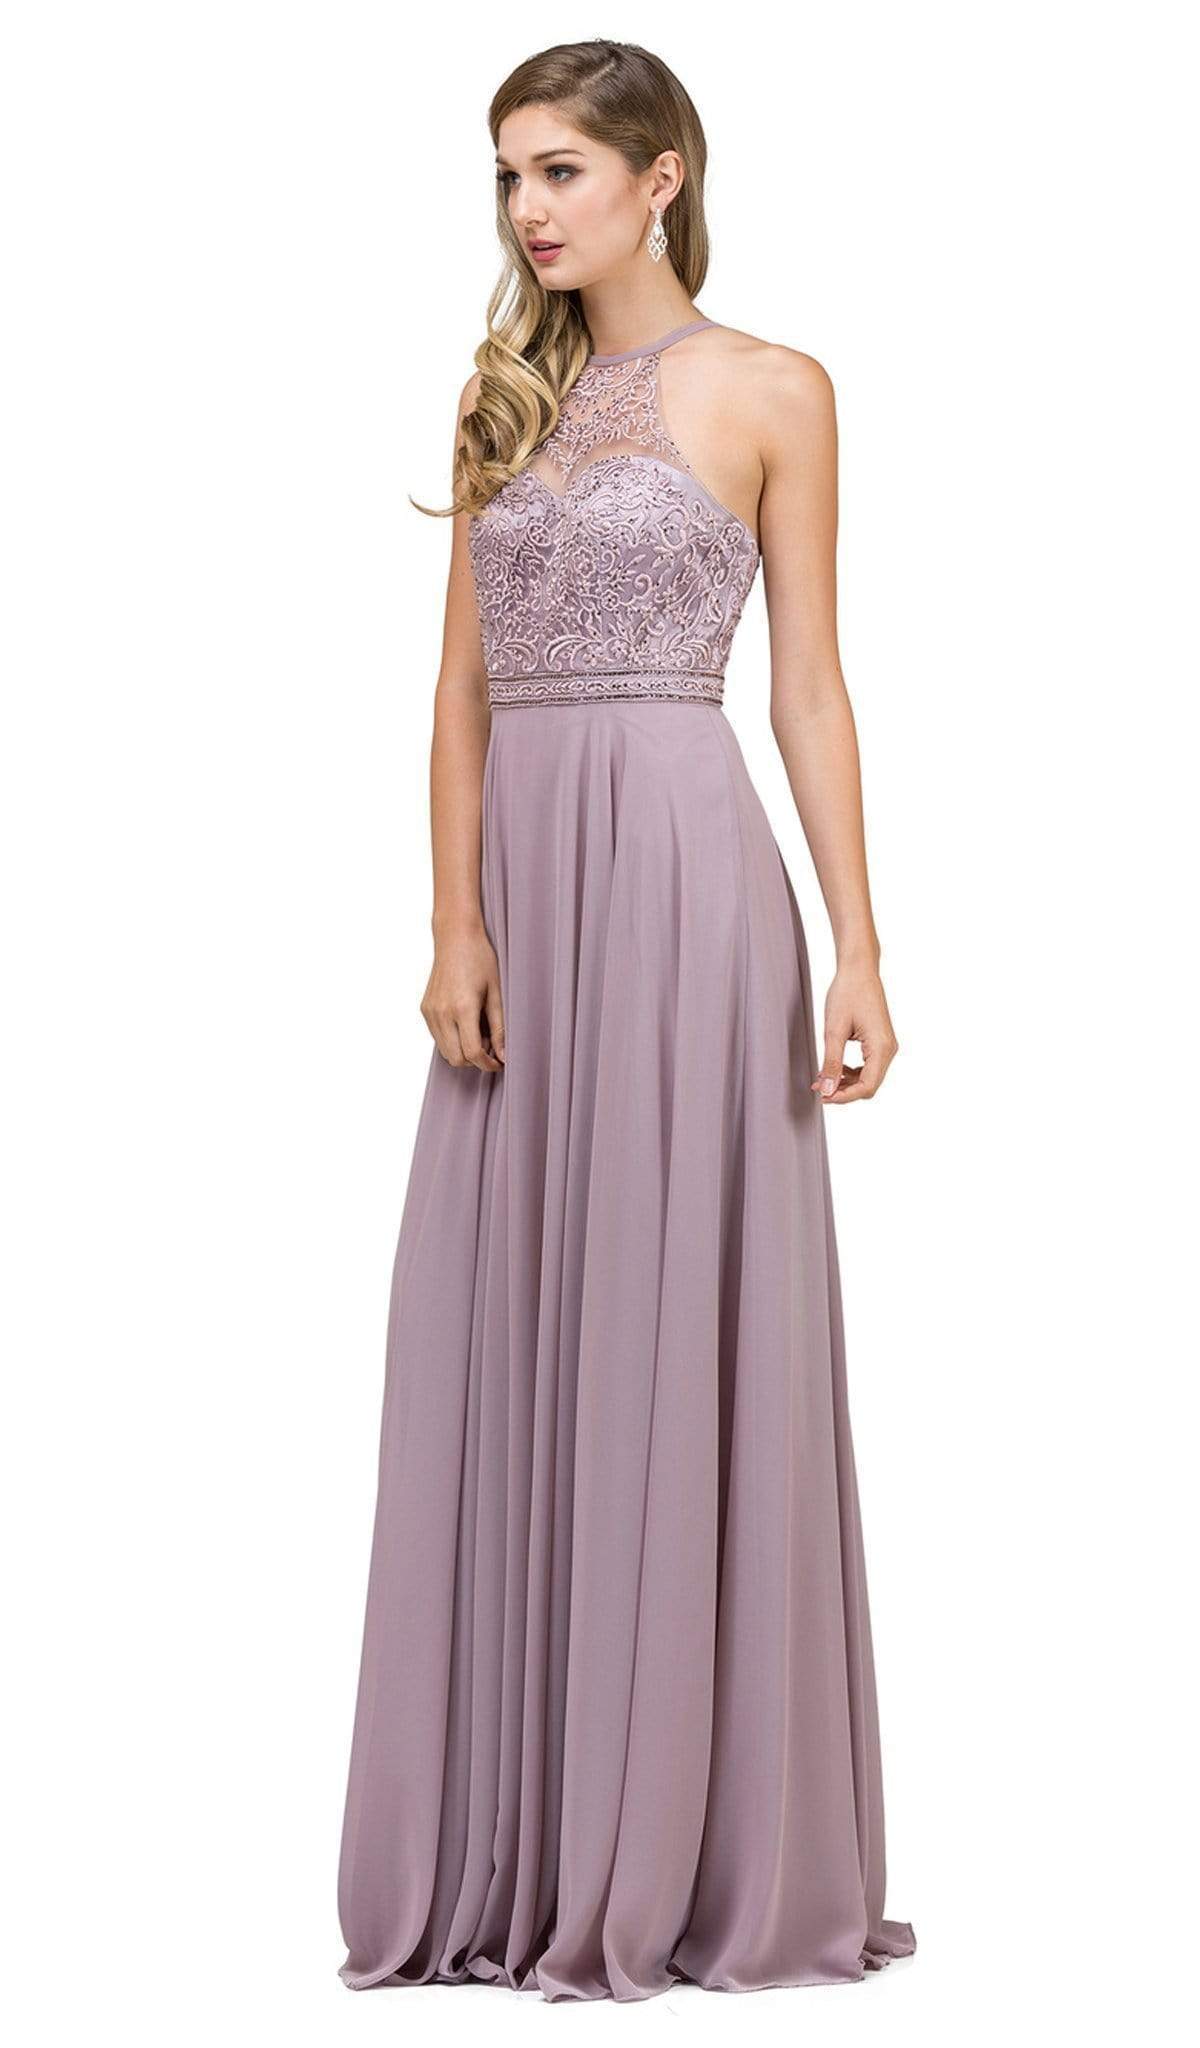 Dancing Queen - 2092 Embroidered Halter A-Line Evening Gown